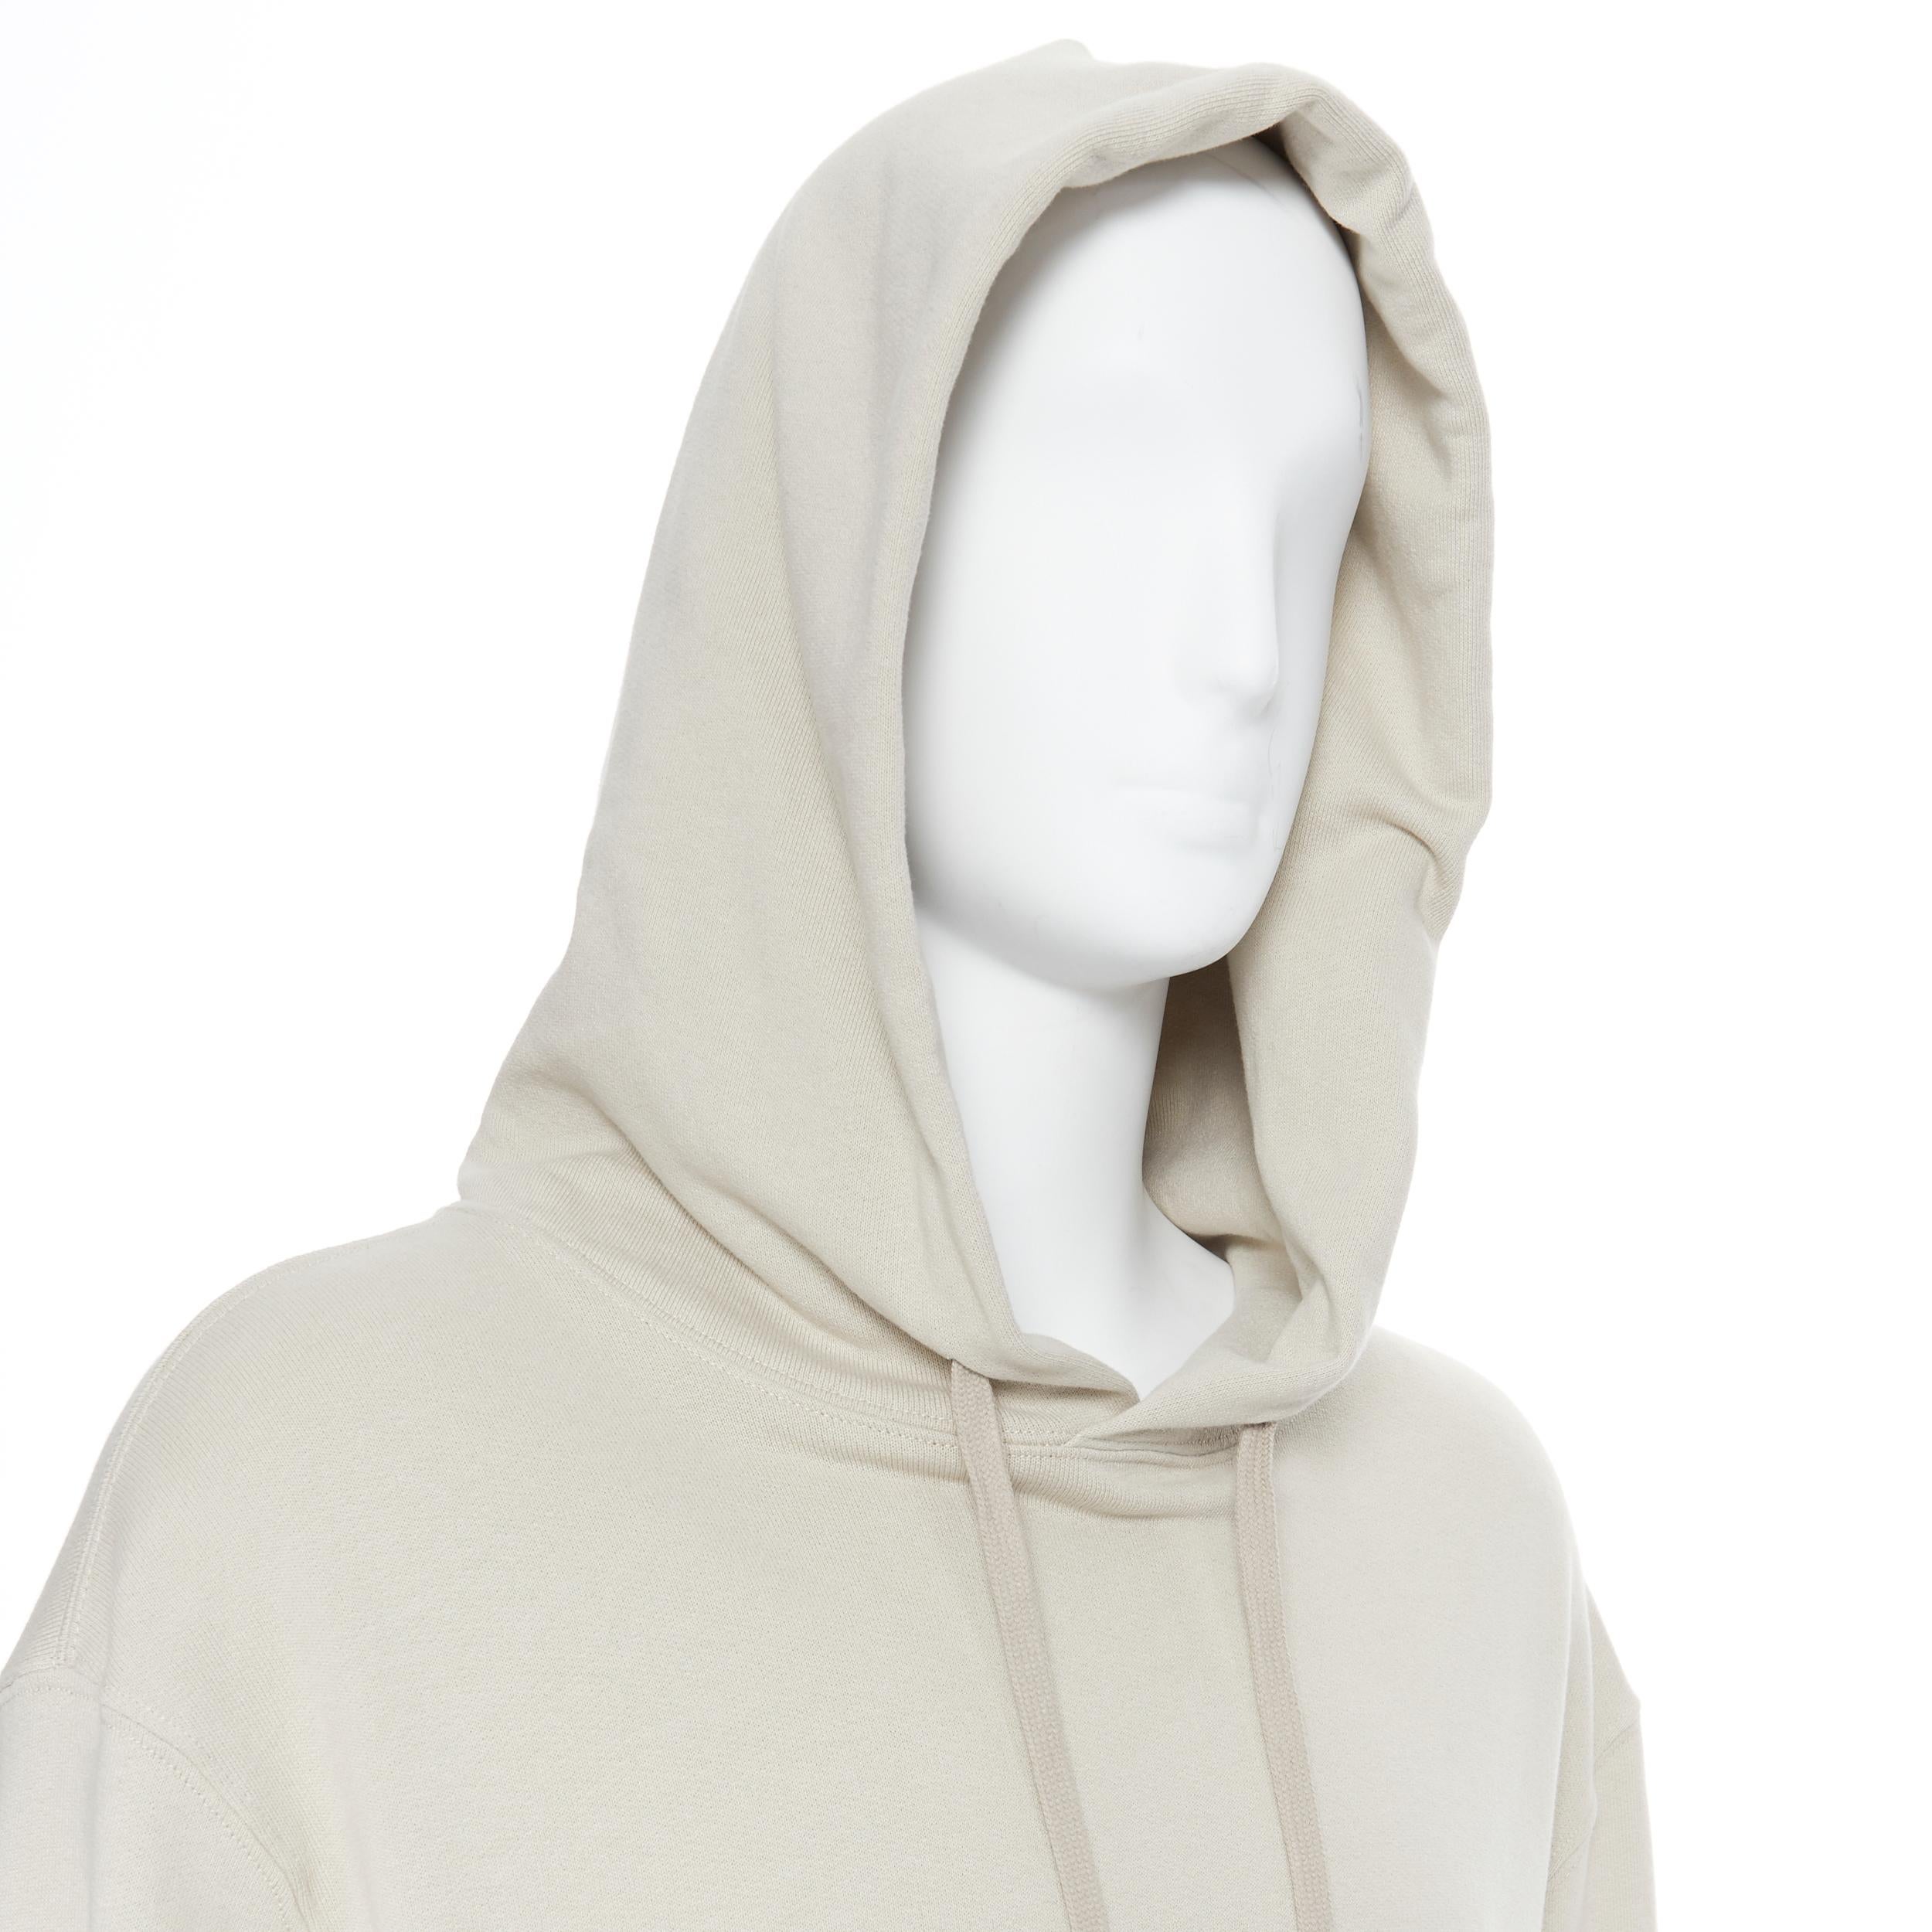 new RICK OWENS CHAMPION SS20 Tecuatl Pearl dust Pentagram oversized hoodie S
Brand: Rick Owens
Designer: Champion
Collection: SS2020
Model Name / Style: Pentagram hoodie
Material: Cotton
Color: Grey; Pearl
Pattern: Solid
Extra Detail: Embroidery